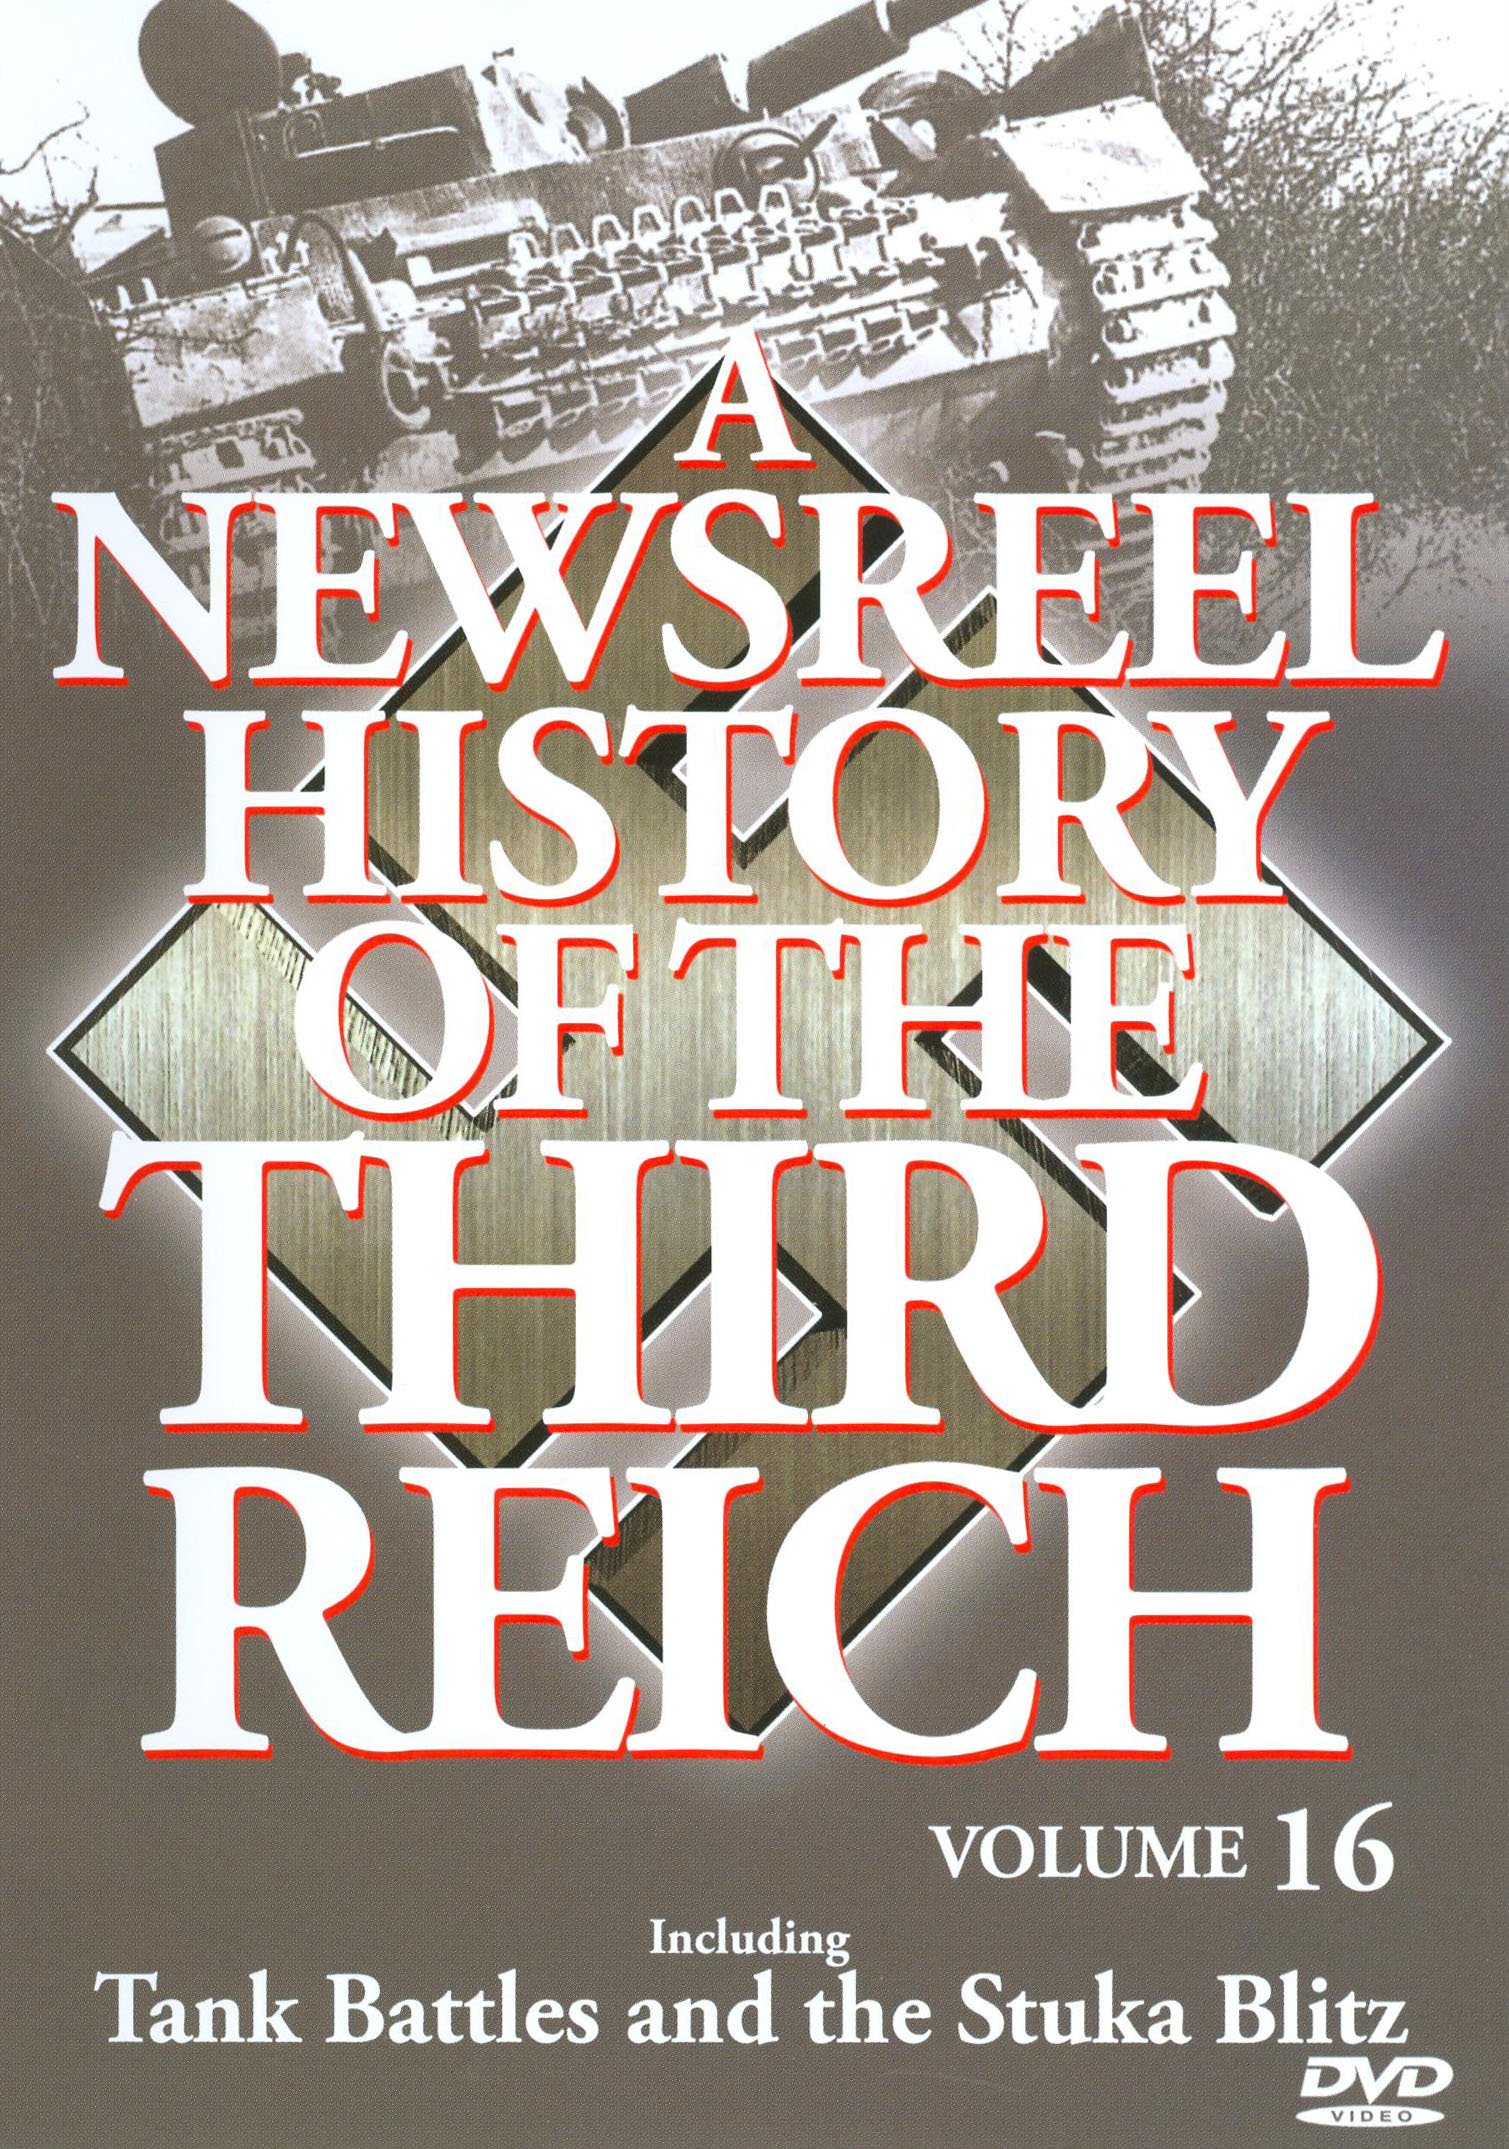 A Newsreel History of the Third Reich, Vol. 16 [DVD] [2008]